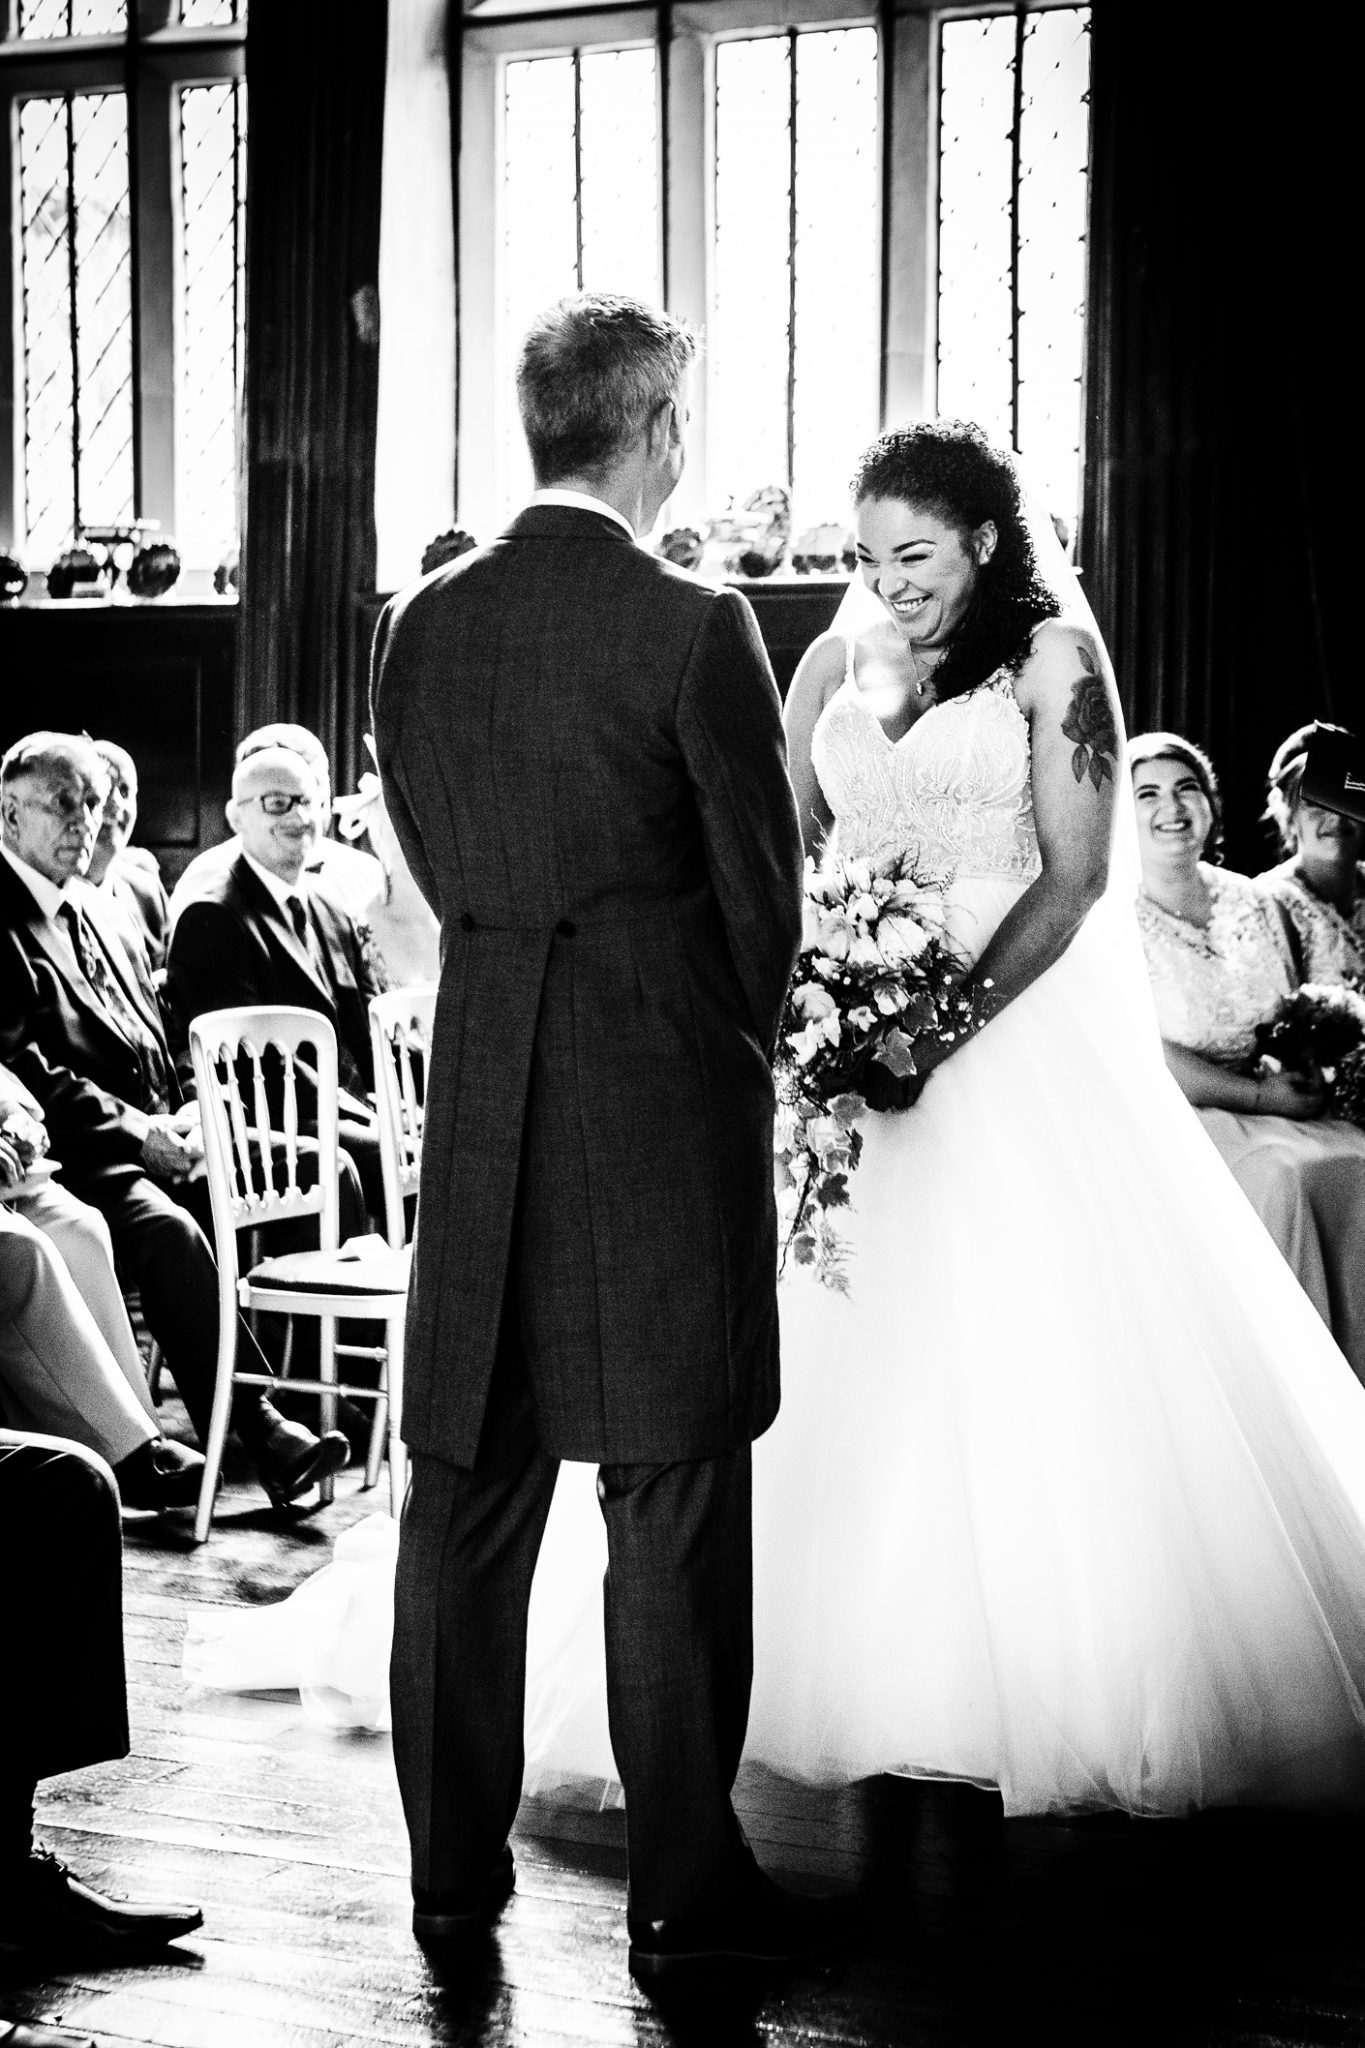 the-bride-and-groom-at-the-wedding-ceremony-in-cheshire